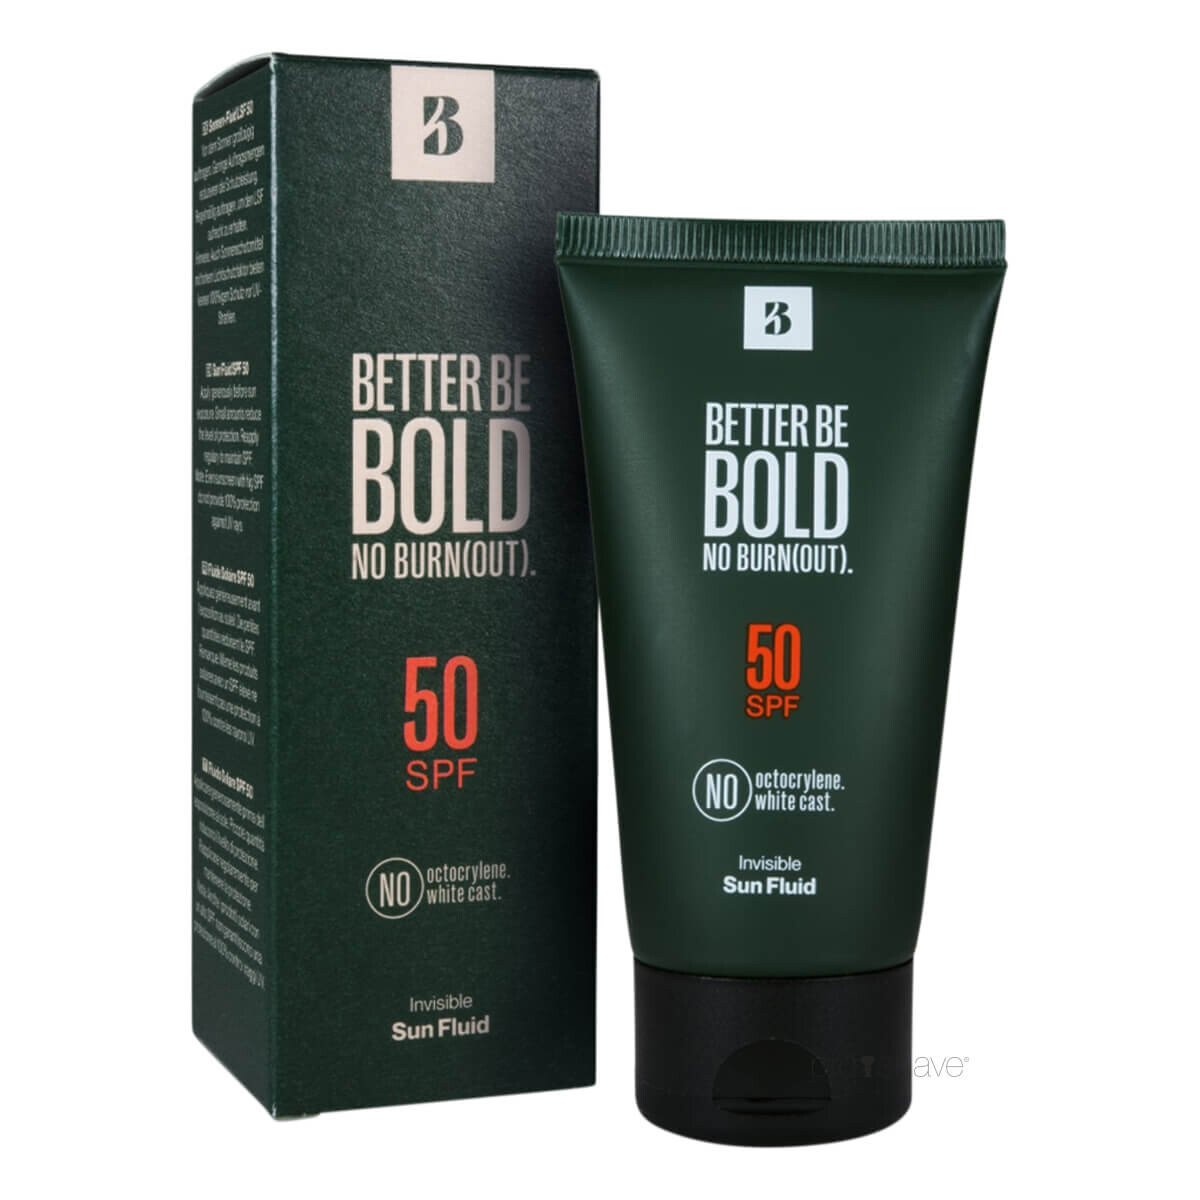 Better Be Bold, Invisible Sun Fluid, SPF 50, 50 ml.